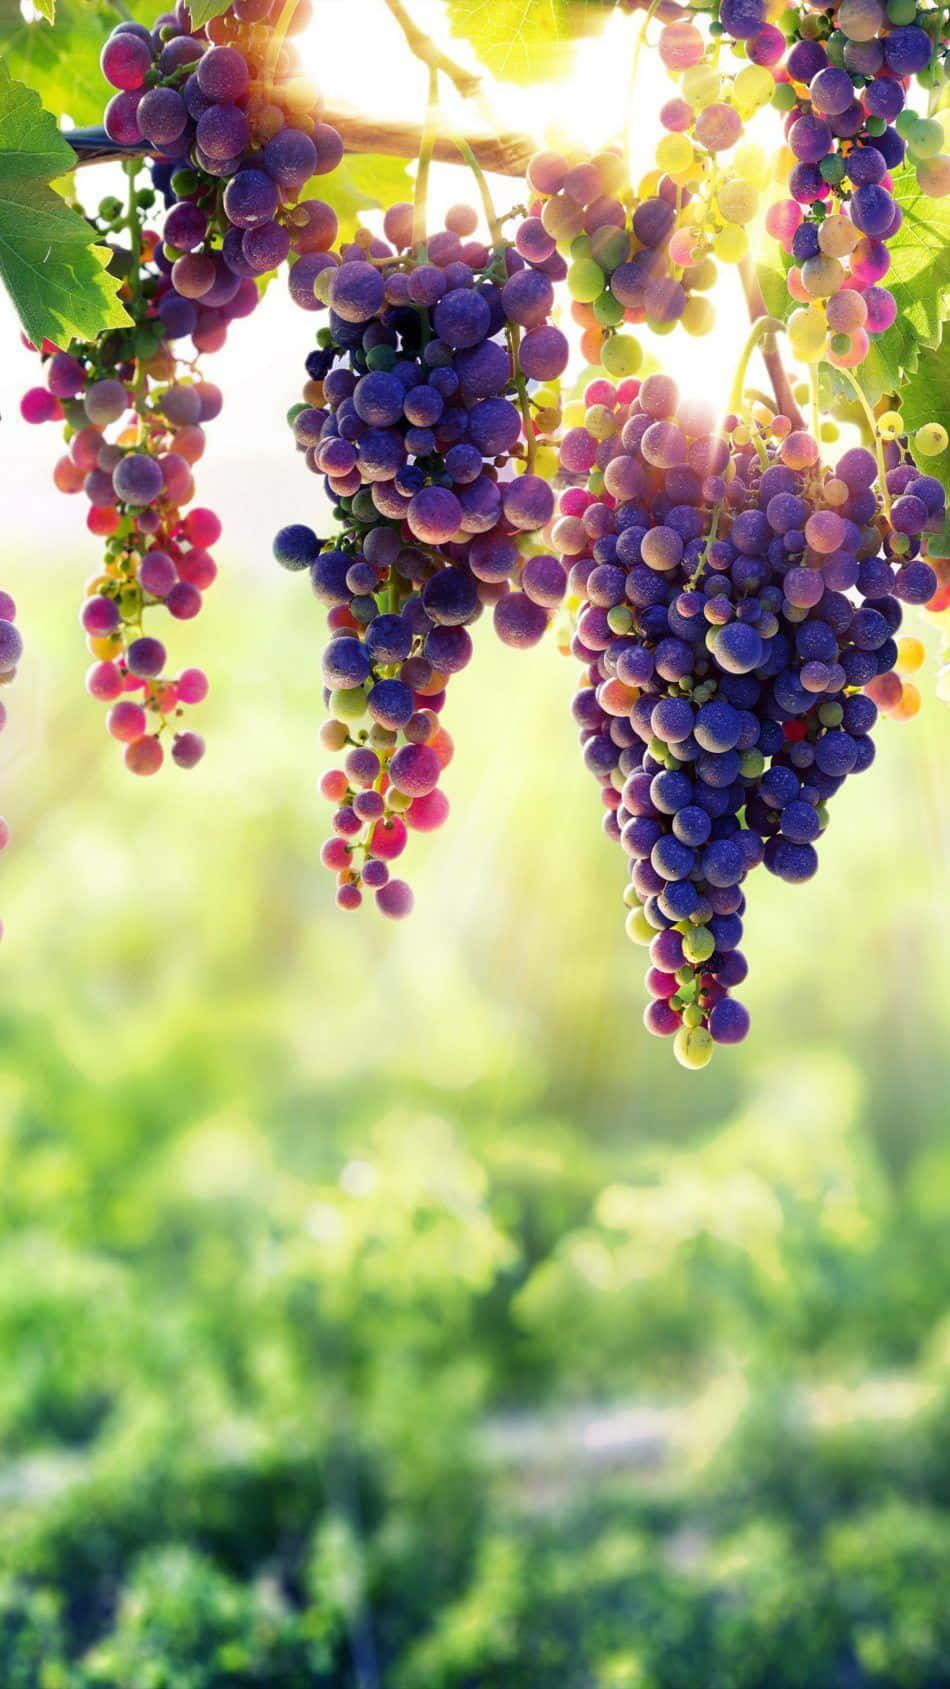 Bunch of fresh grapes on a vine